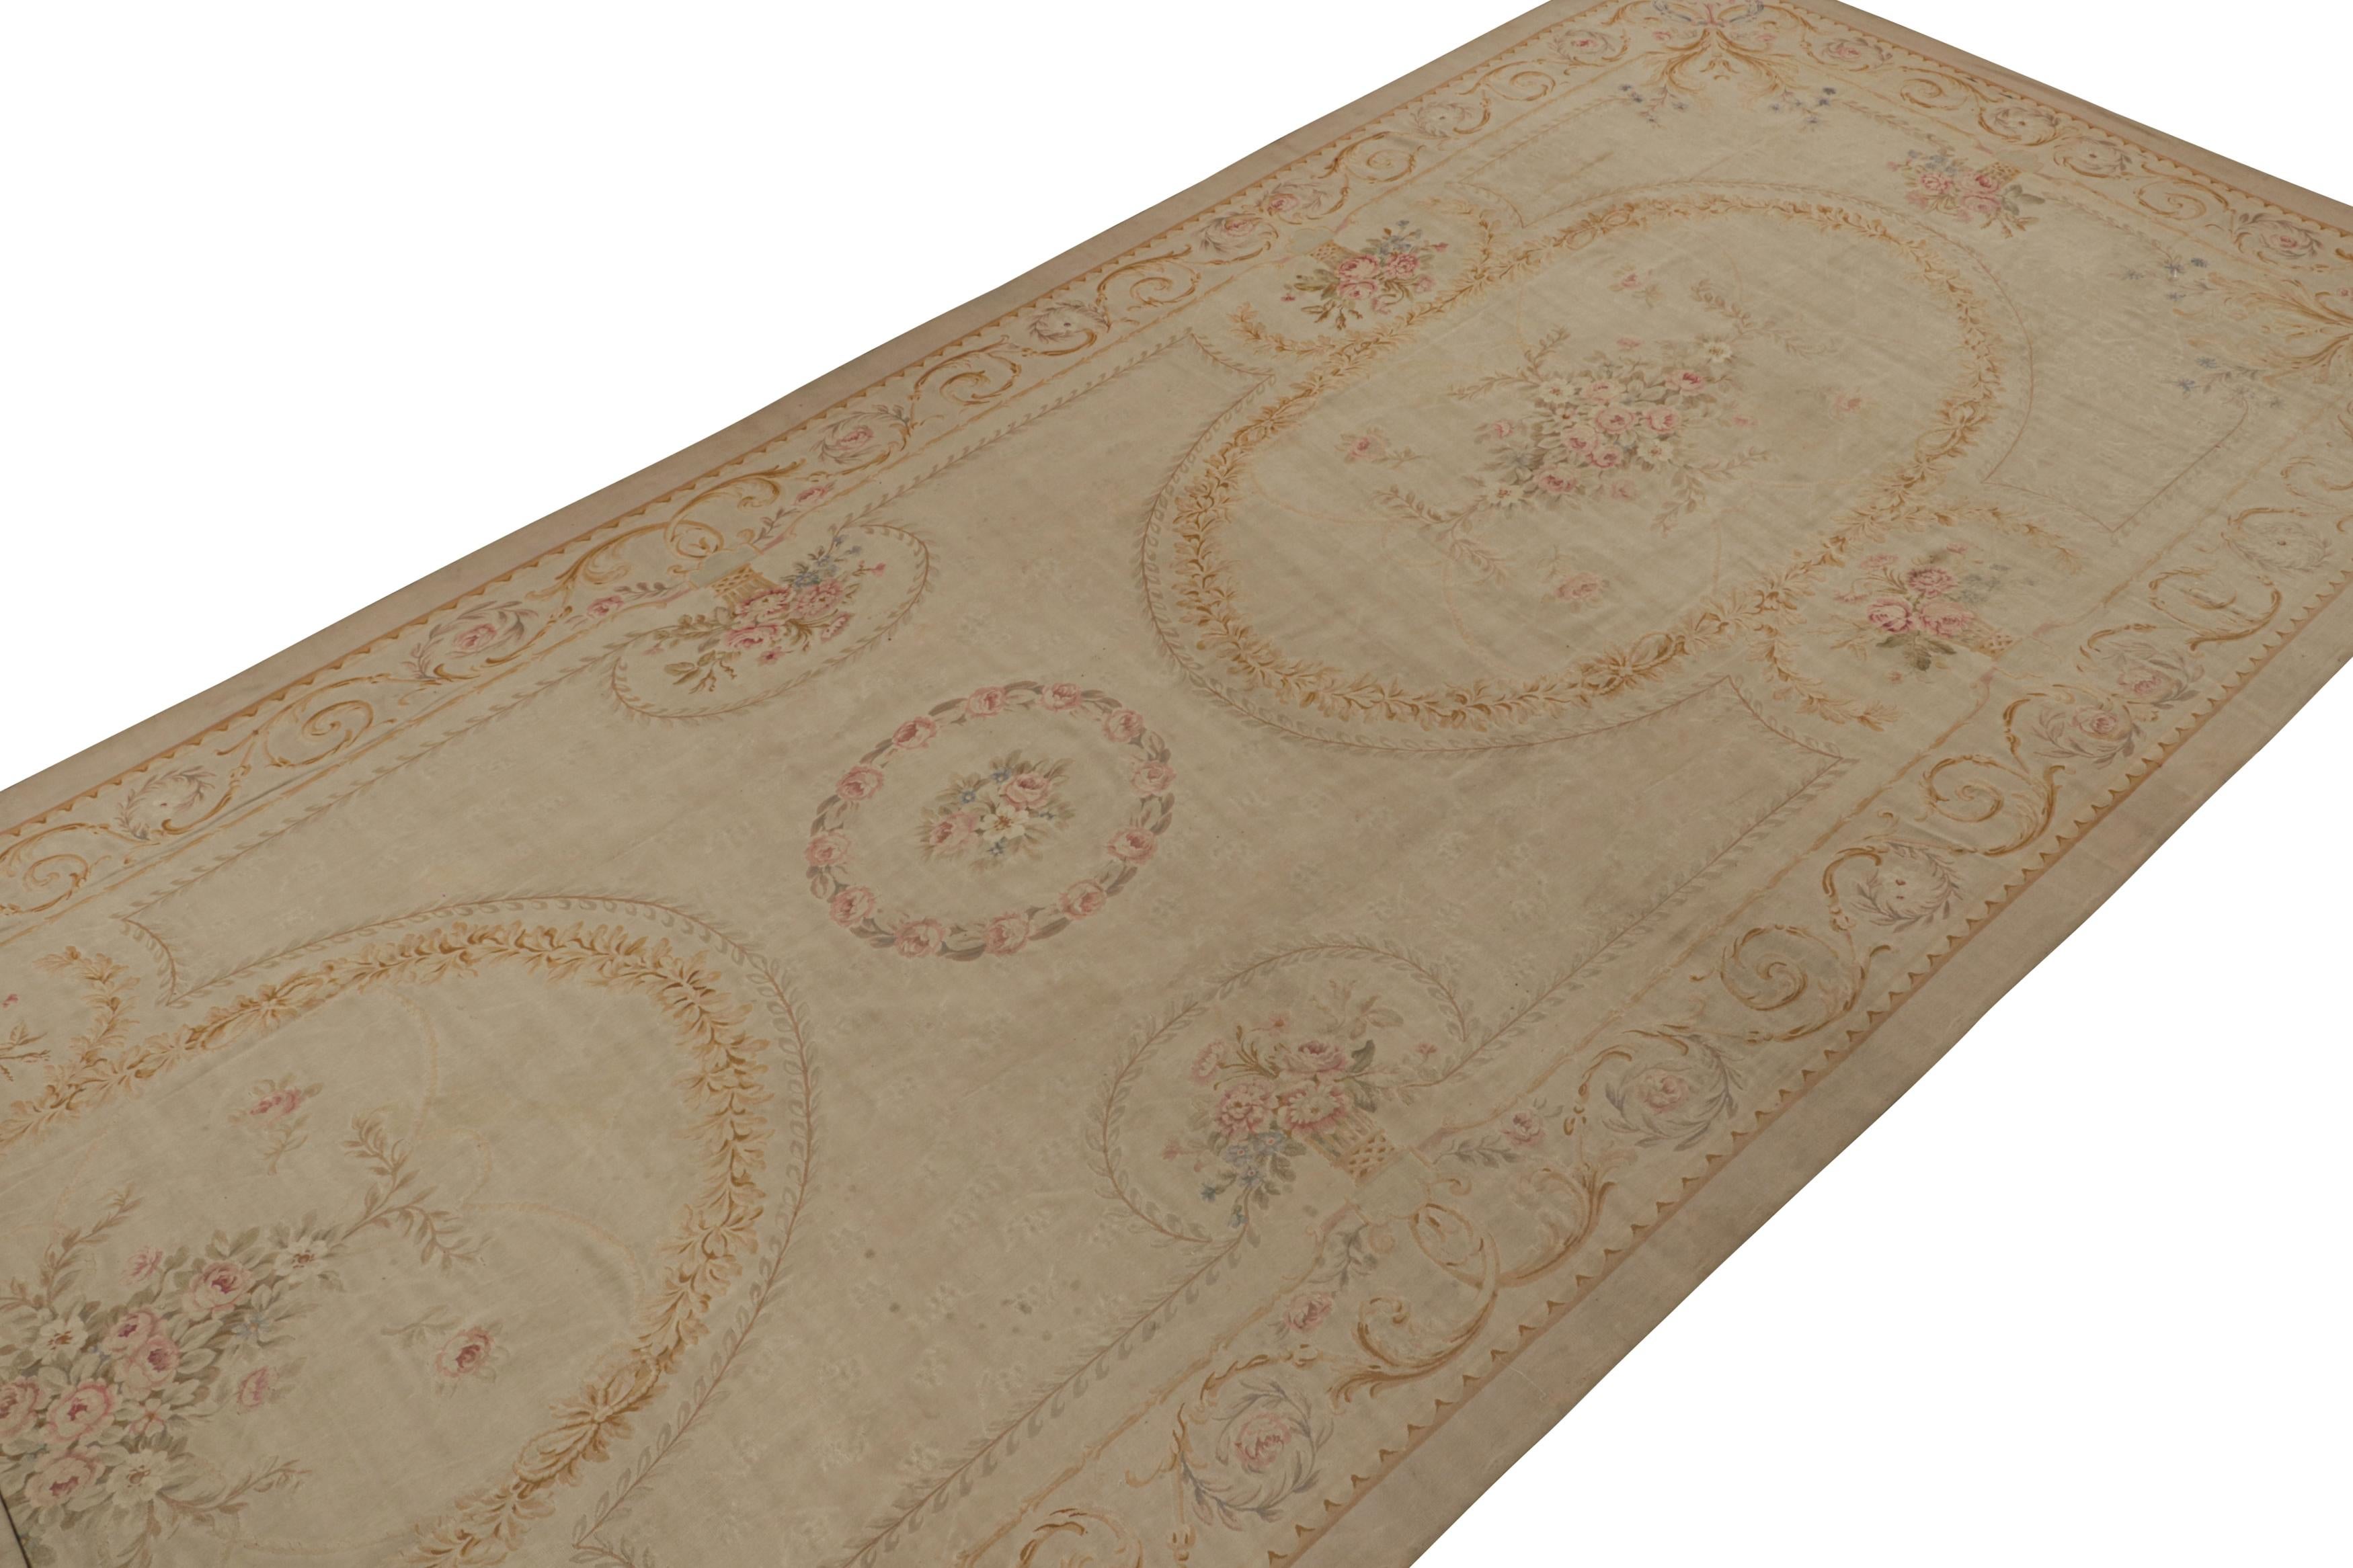 Handwoven in wool, this 10x26 antique Aubusson flatweave rug is an extremely rare oversized gallery runner from turn–of-the-century France. Its design favors beige and taupe undertones, with elegant medallions and floral patterns in the French